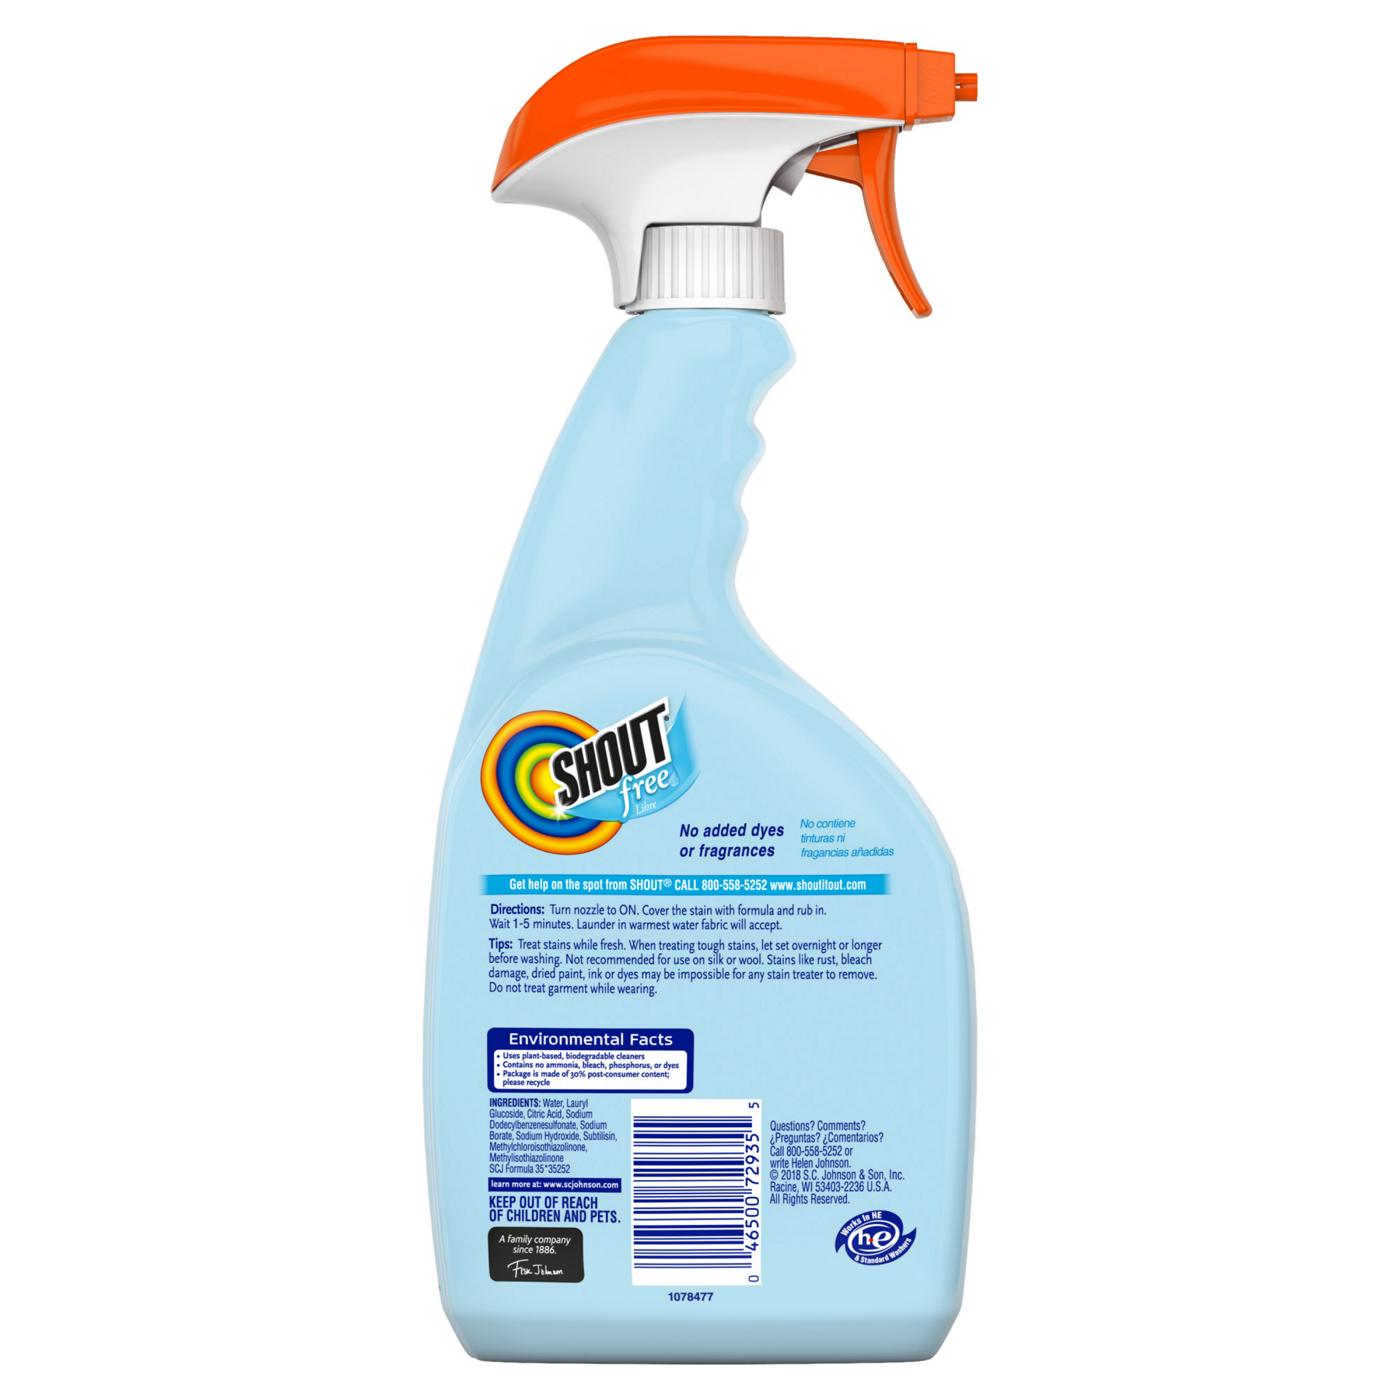 Shout Dye & Fragrance Free Laundry Stain Remover; image 9 of 10